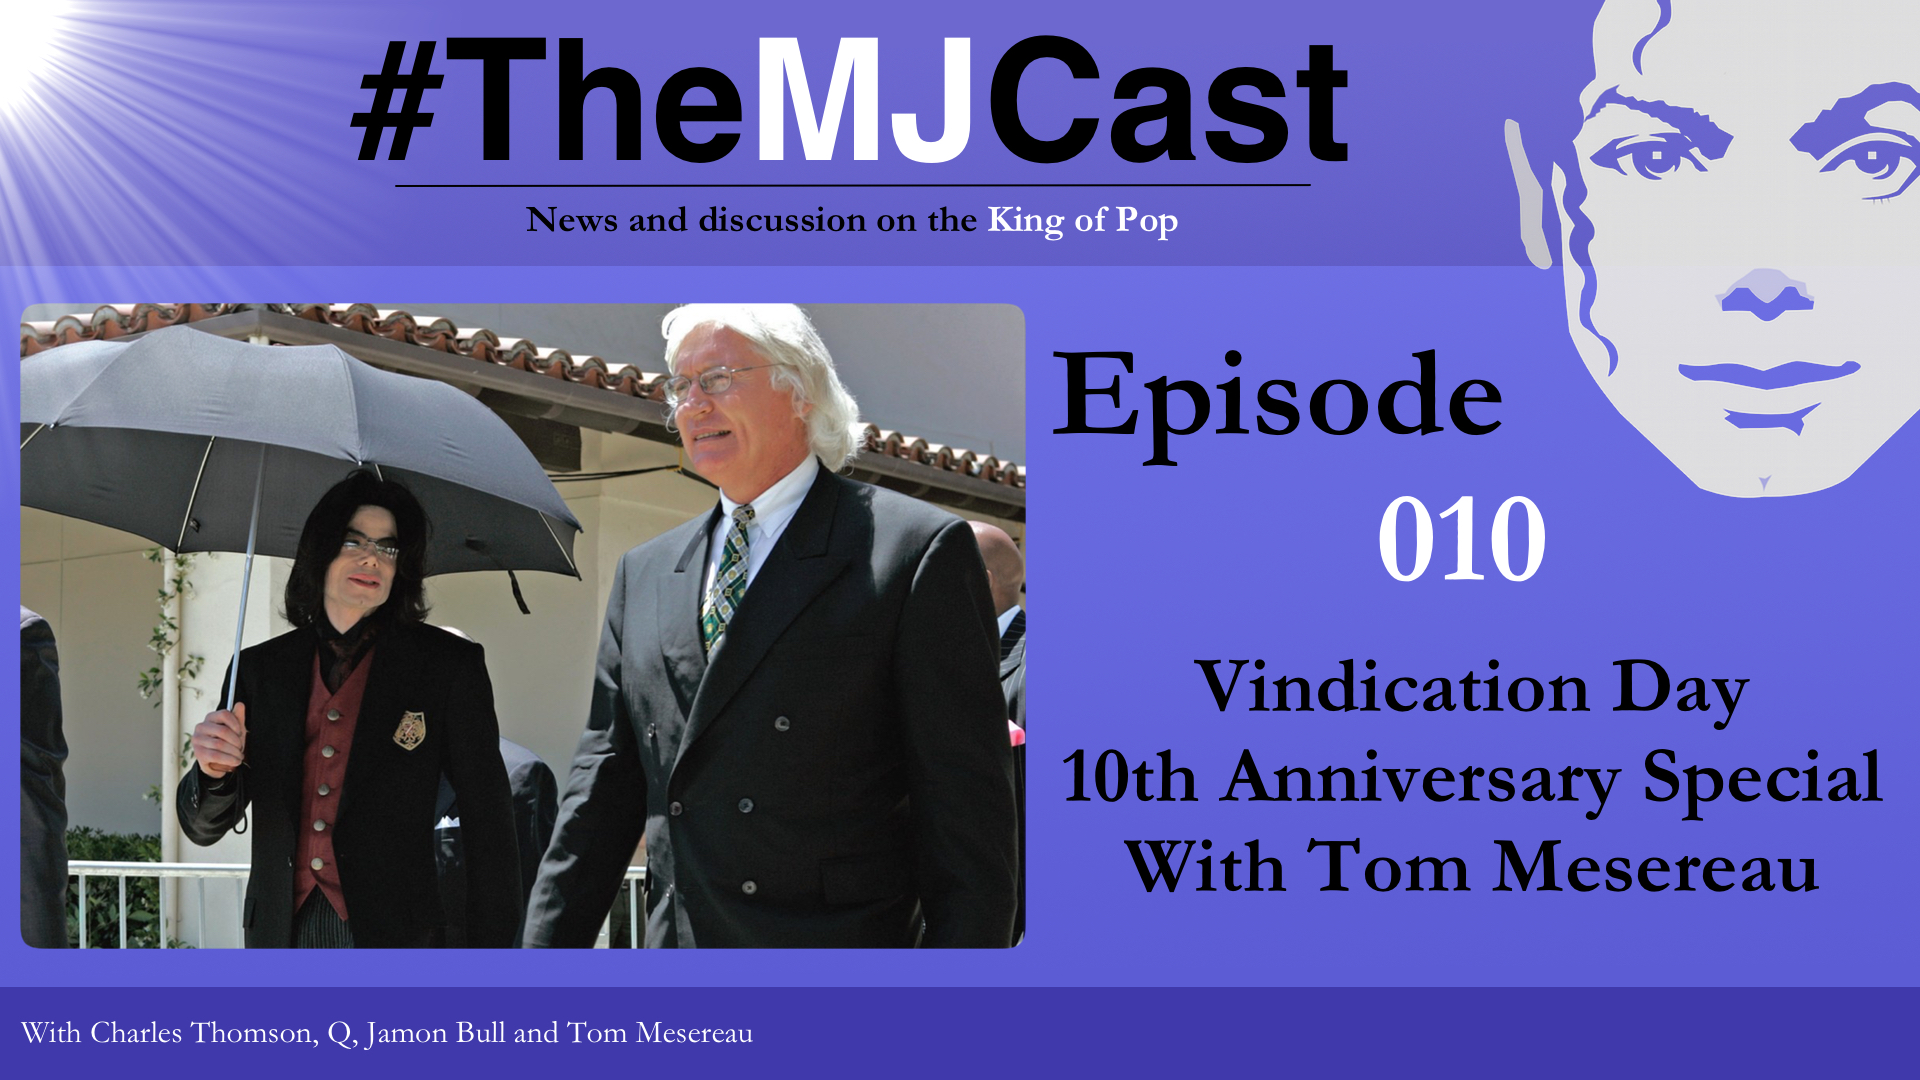 Episode 010 - Vindication Day 10th Anniversary Special With Tom Mesereau YouTube Art